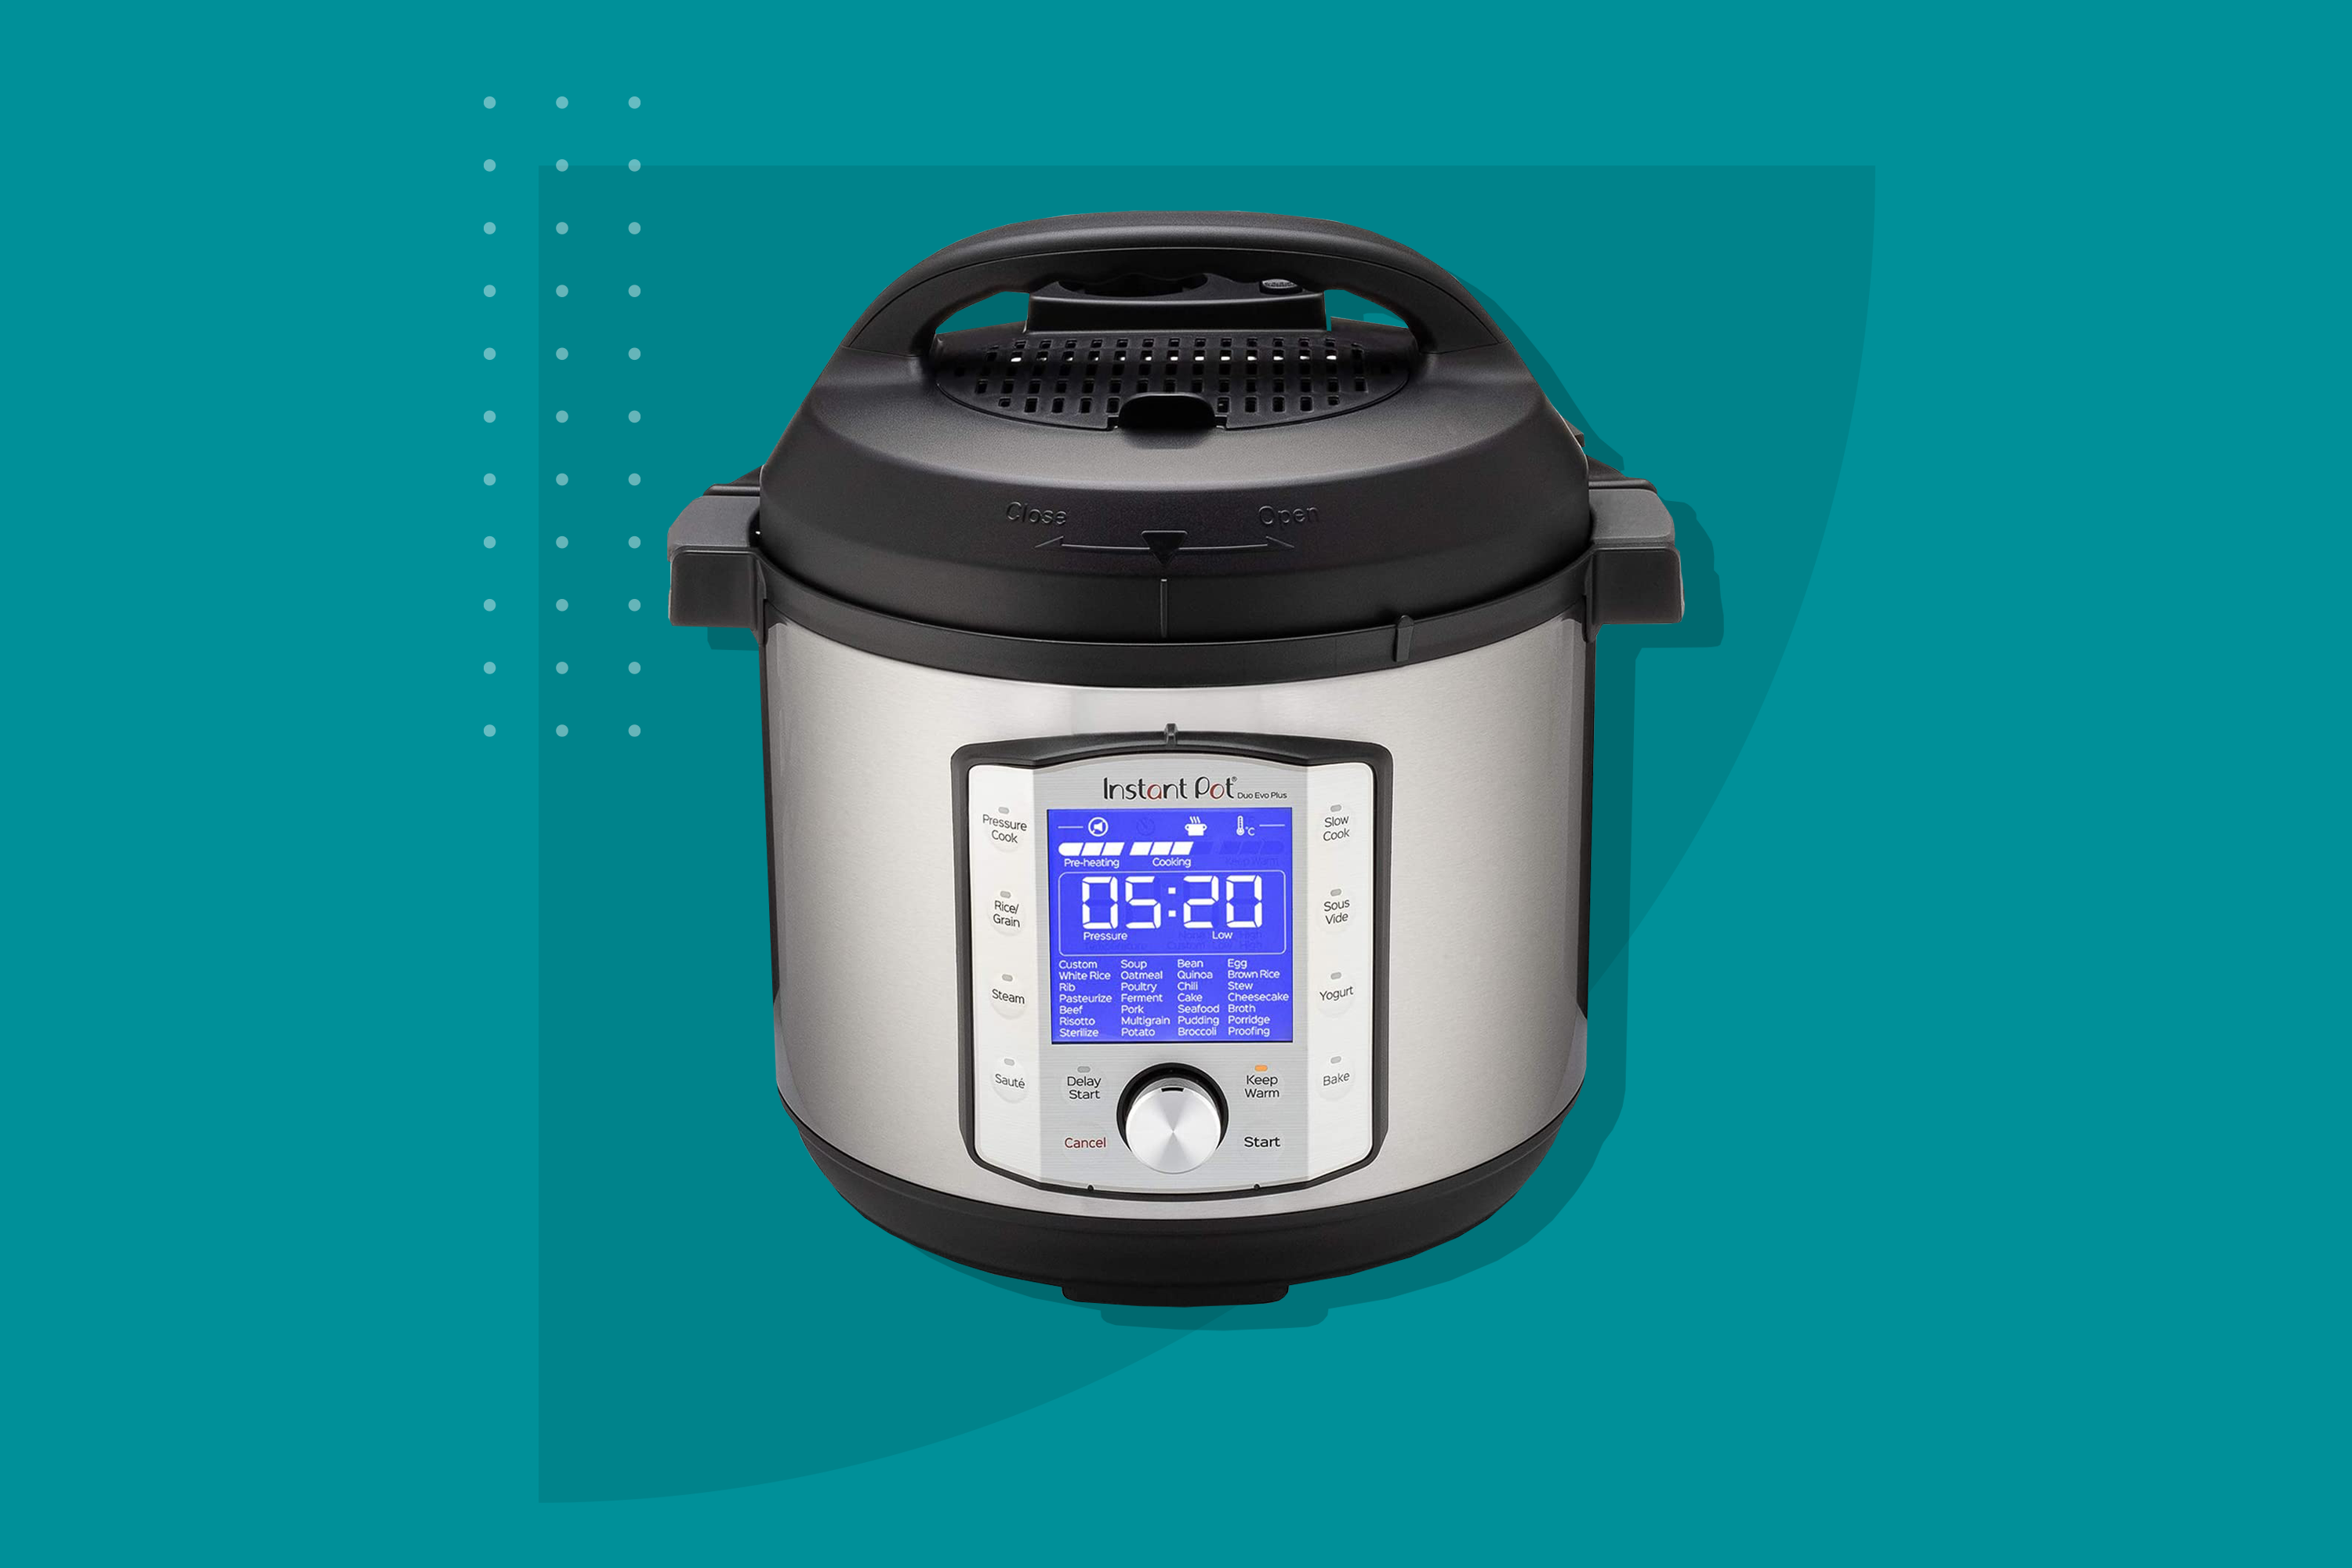 Does Instant Pot Duo Plus have a delay start function?